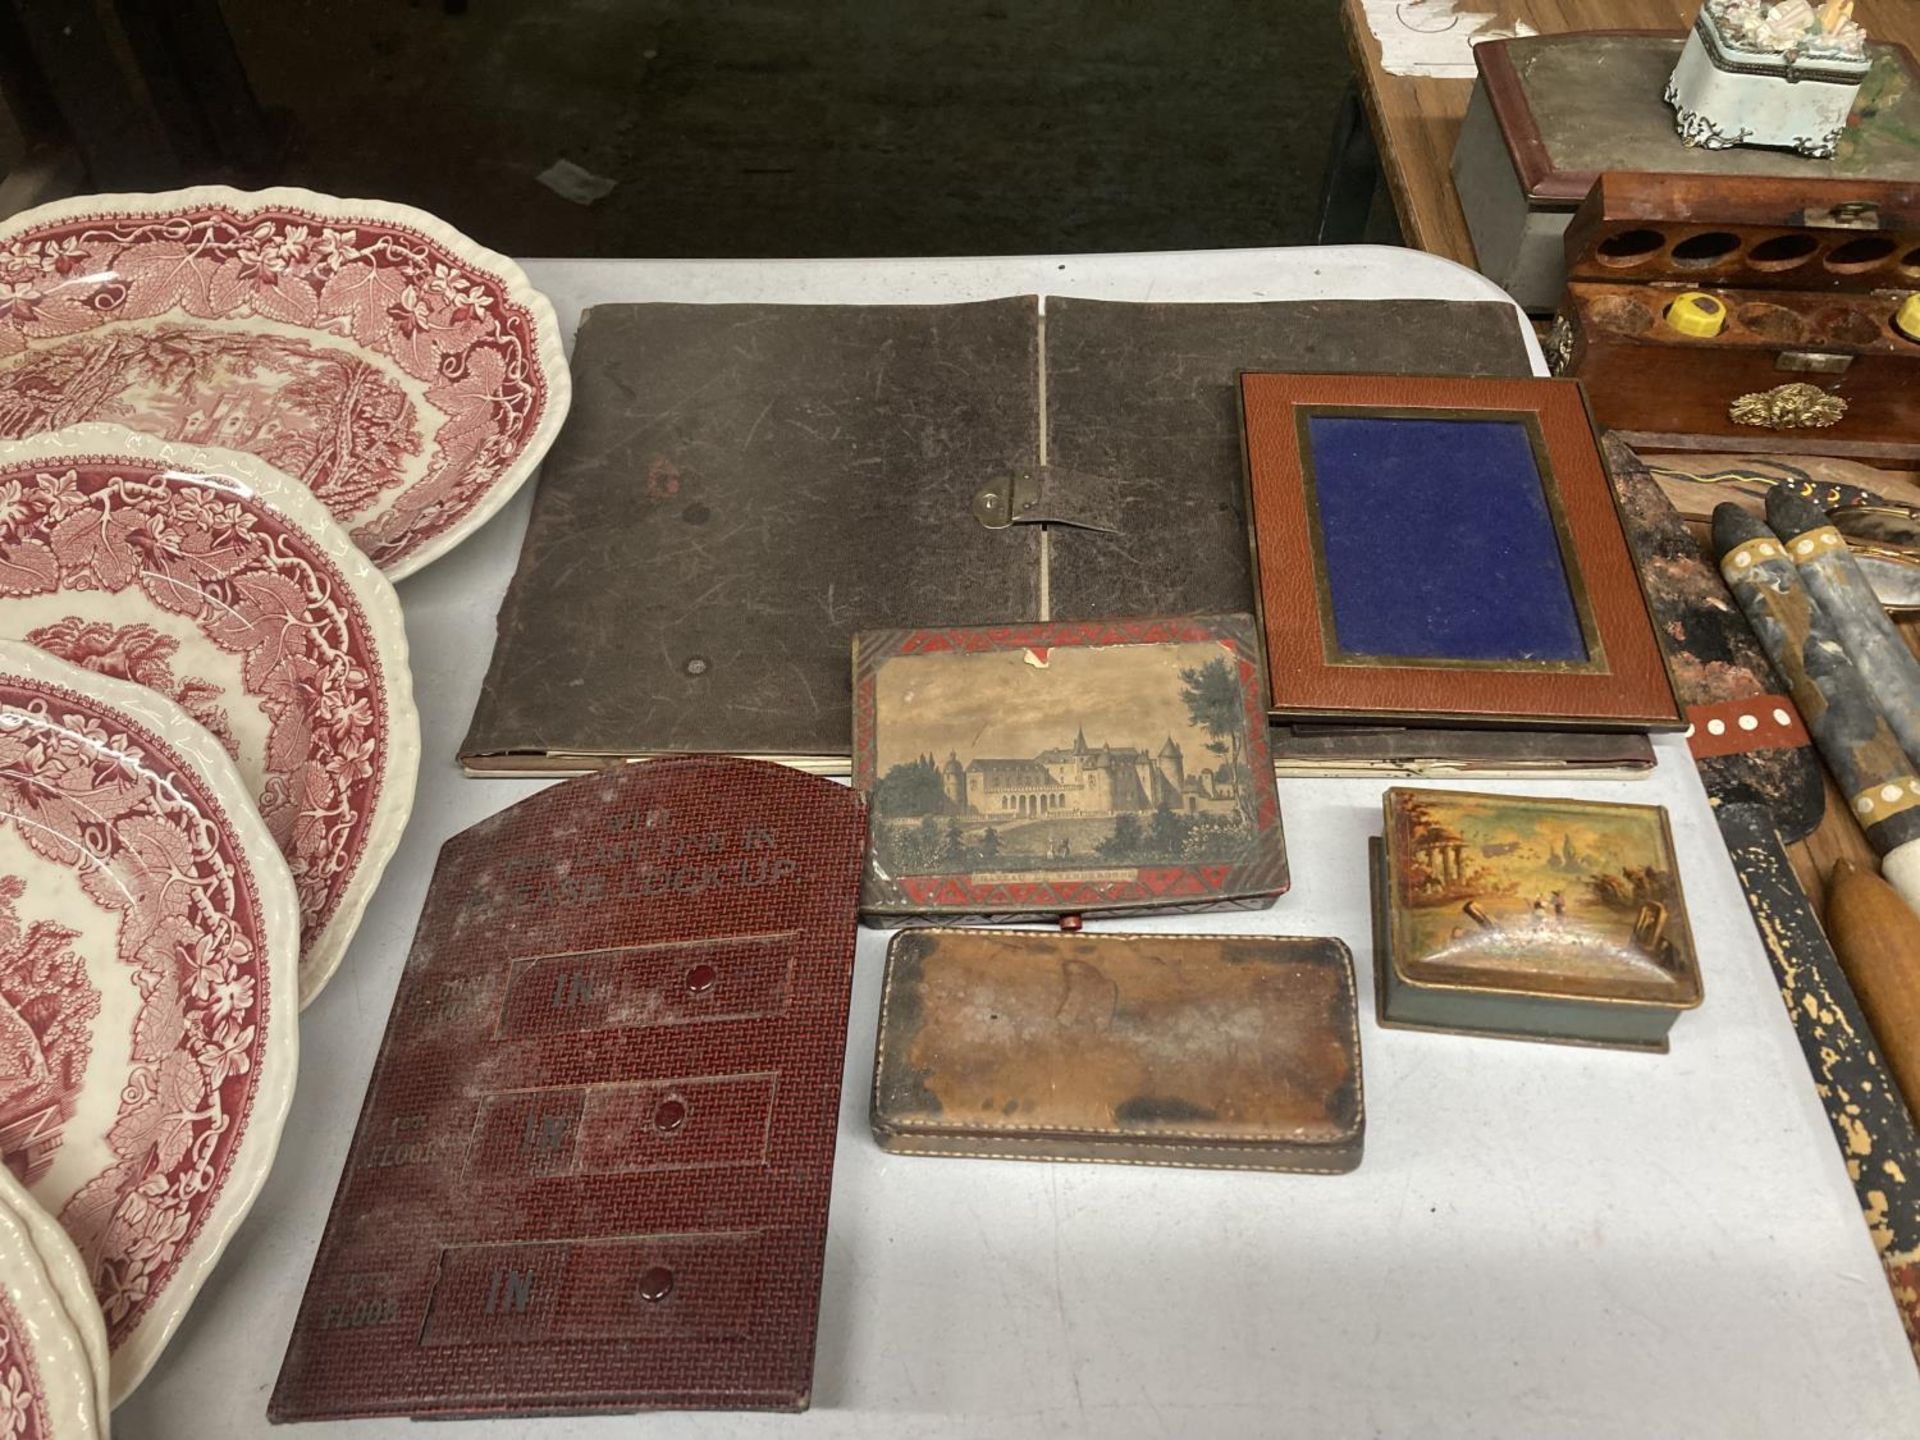 A VINTAGE LEATHER BOUND BLOTTER PAD, TWO METAL BOX ES, ONE WITH A PAINTED TOP, THE OTHER HAVING AN